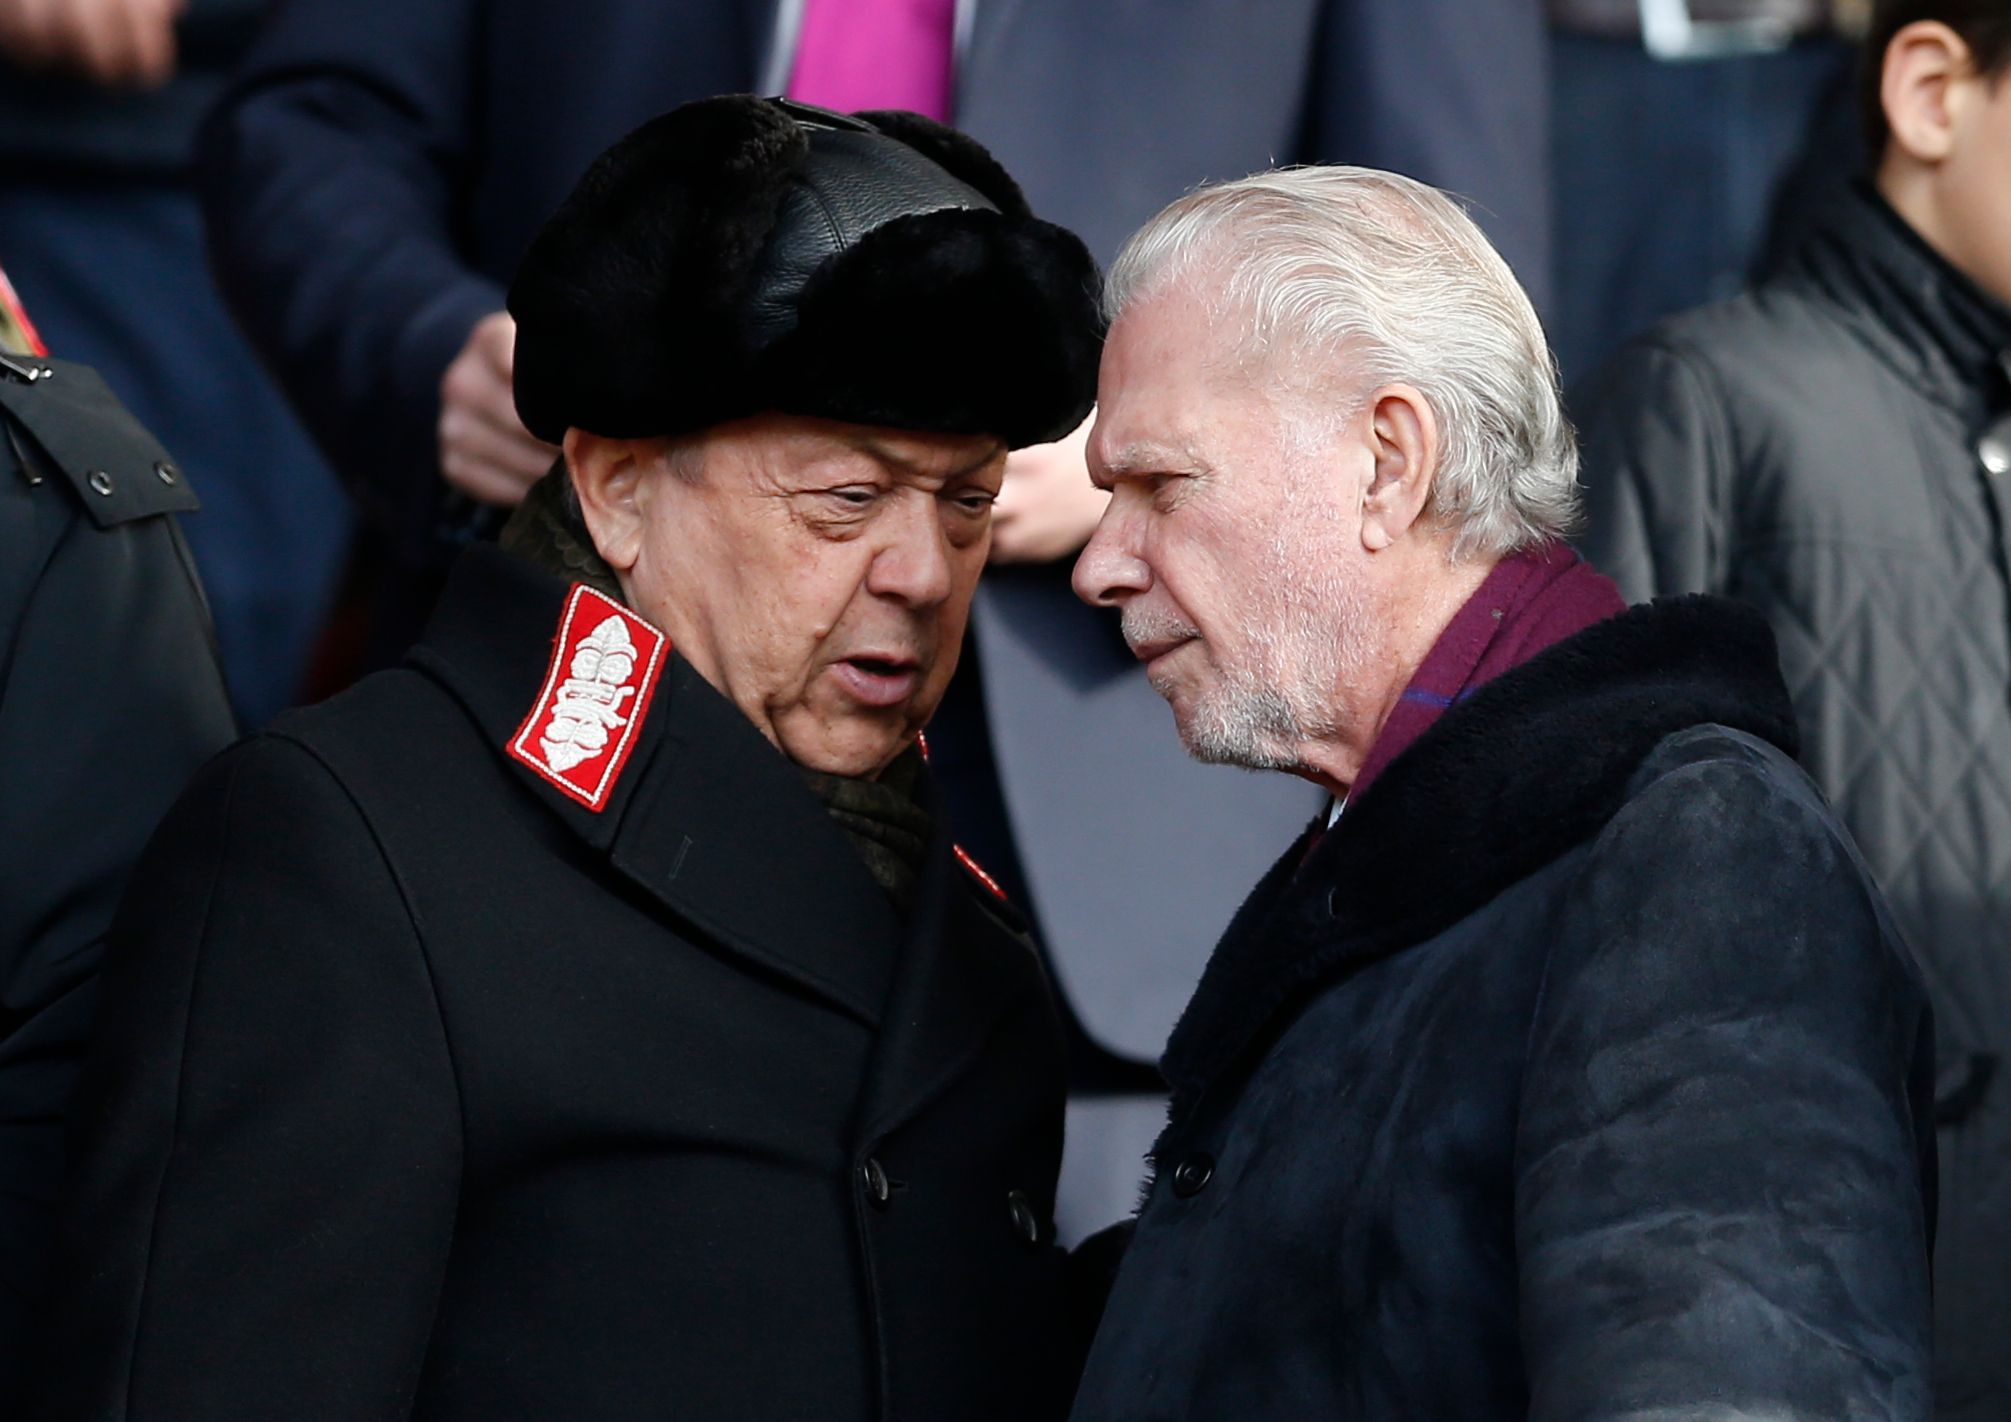 Britain Football Soccer - Southampton v West Ham United - Premier League - St Mary's Stadium - 4/2/17 West Ham United owners David Gold and David Sullivan Action Images via Reuters / Matthew Childs Livepic EDITORIAL USE ONLY. No use with unauthorized audio, video, data, fixture lists, club/league logos or 